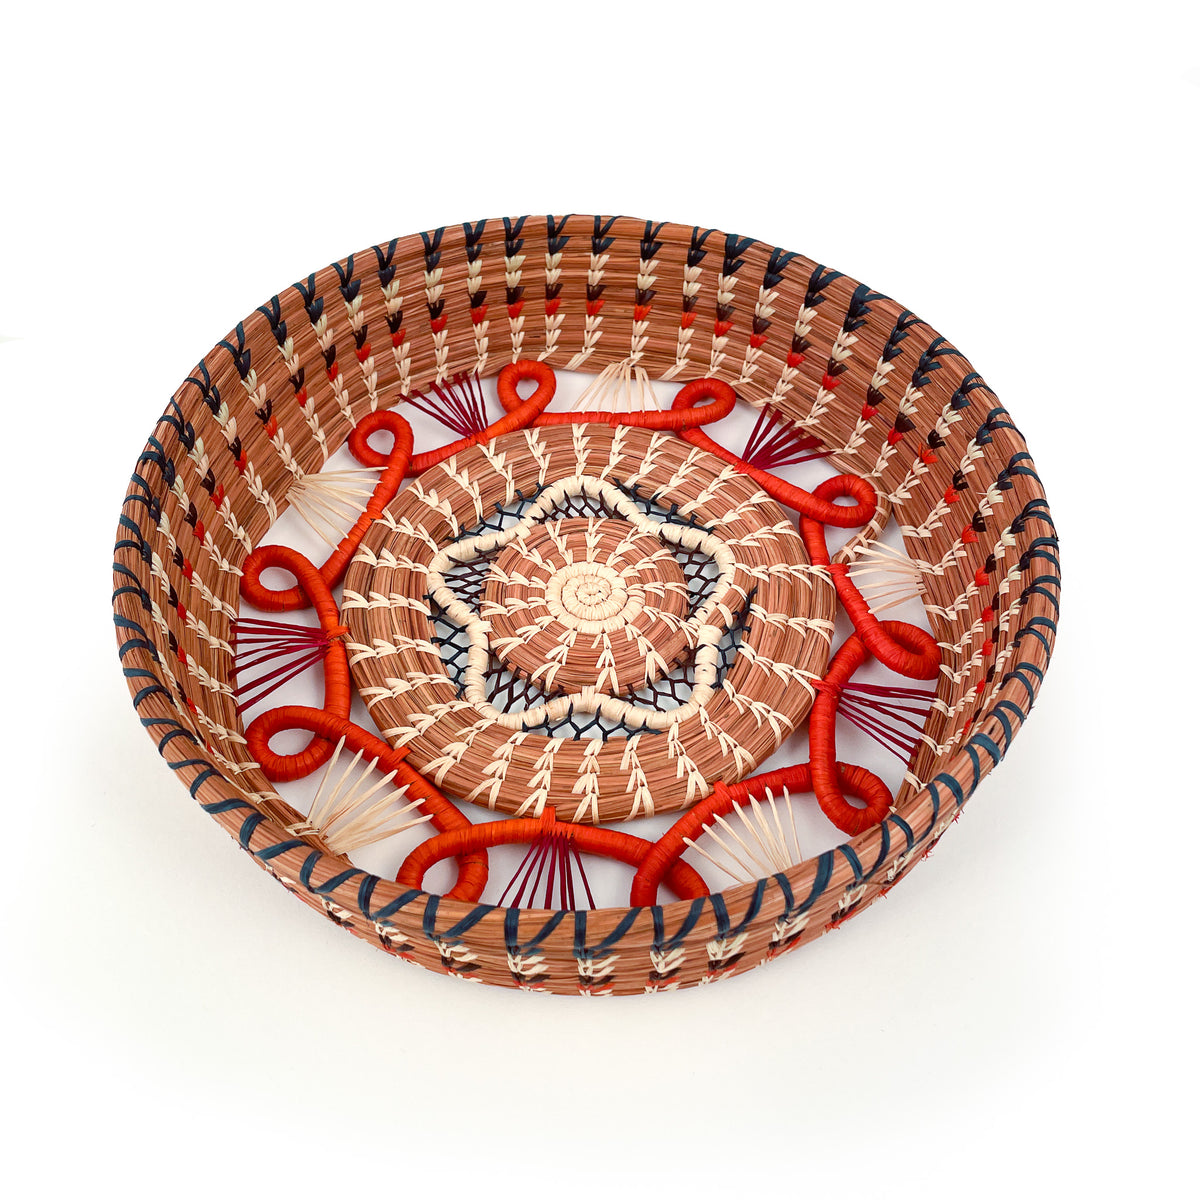 Front-facing view looking down into circular basket with star-shaped accent in center, surrounded by orange loop detail